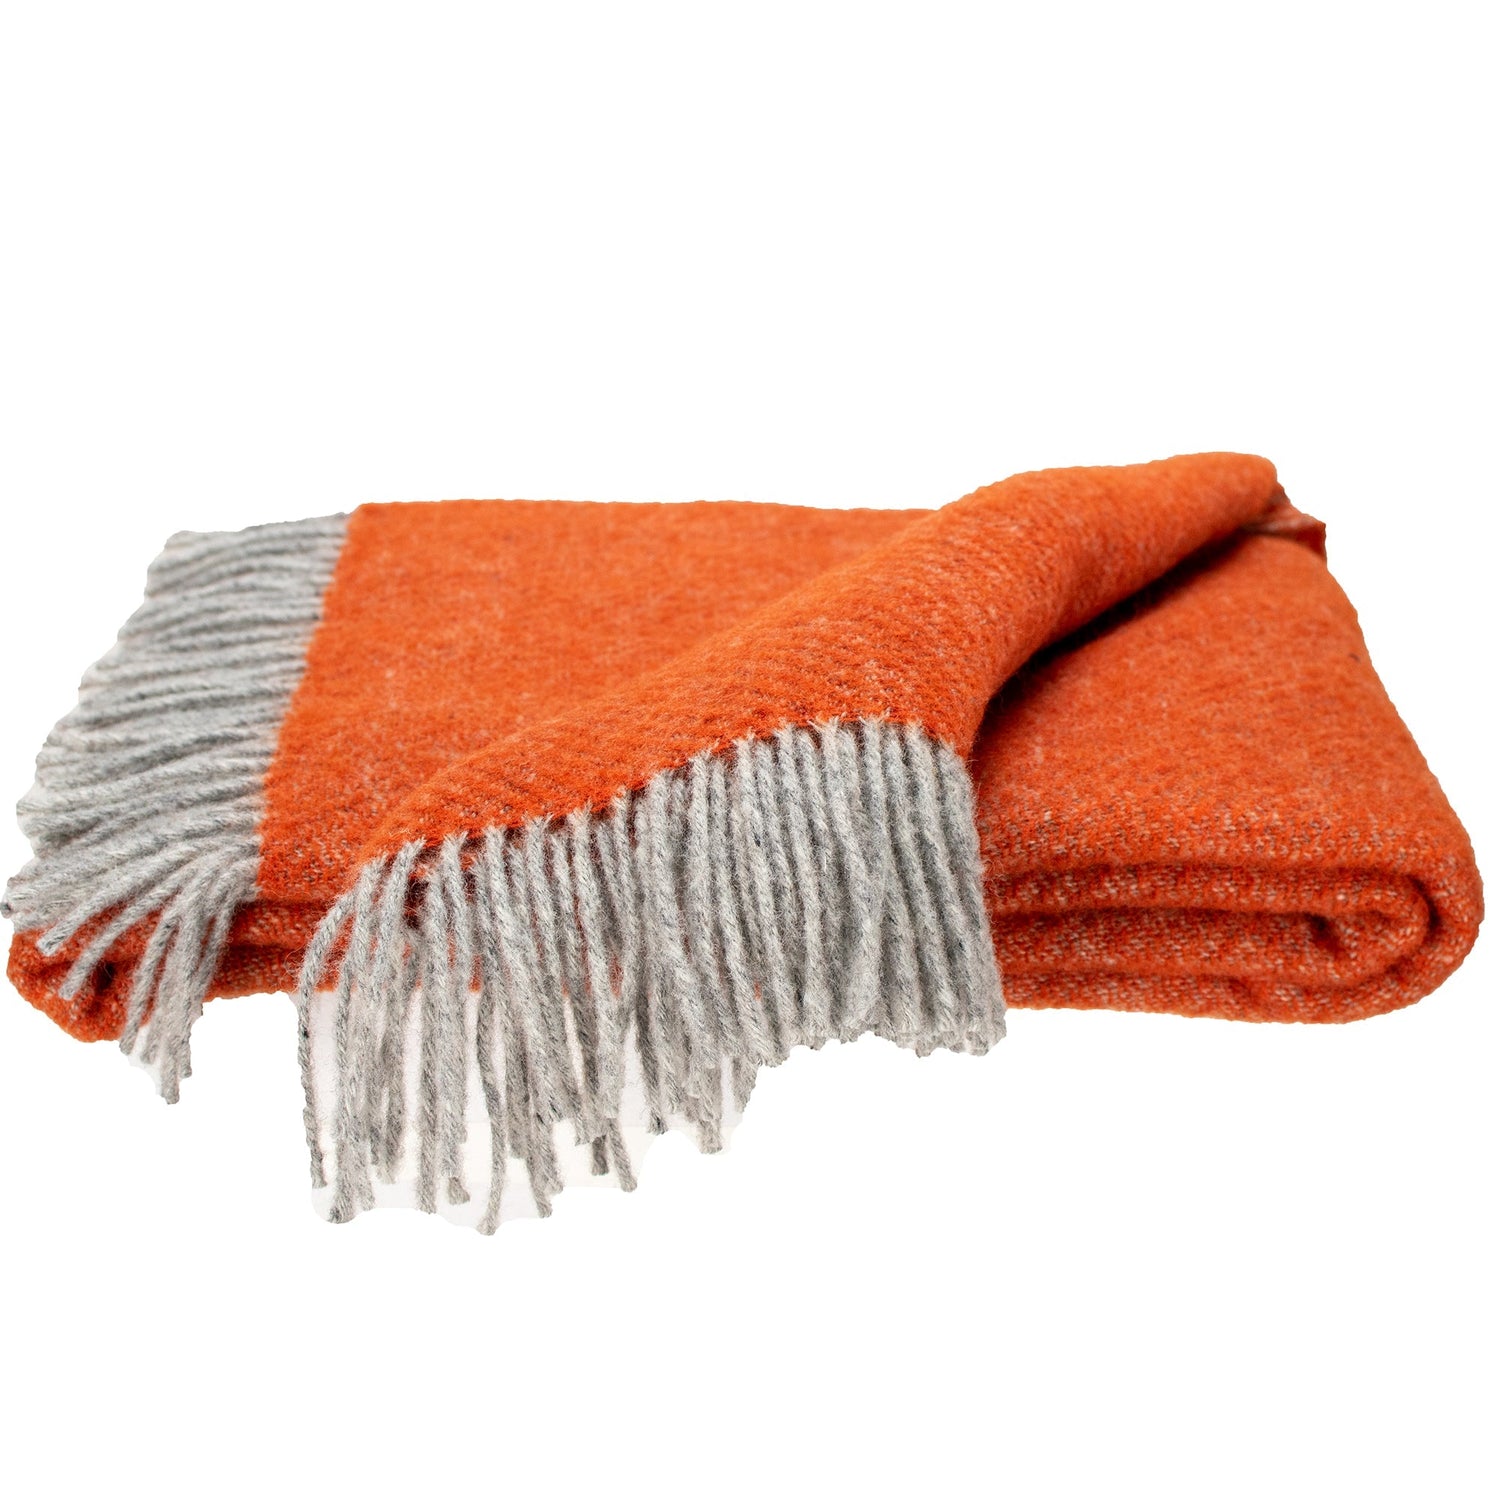 Southampton Home Wool Twill Throw Blanket (Poppy Orange)-Throws and Blankets-810032752439-SHWoolTwillOrange-Prince of Scots